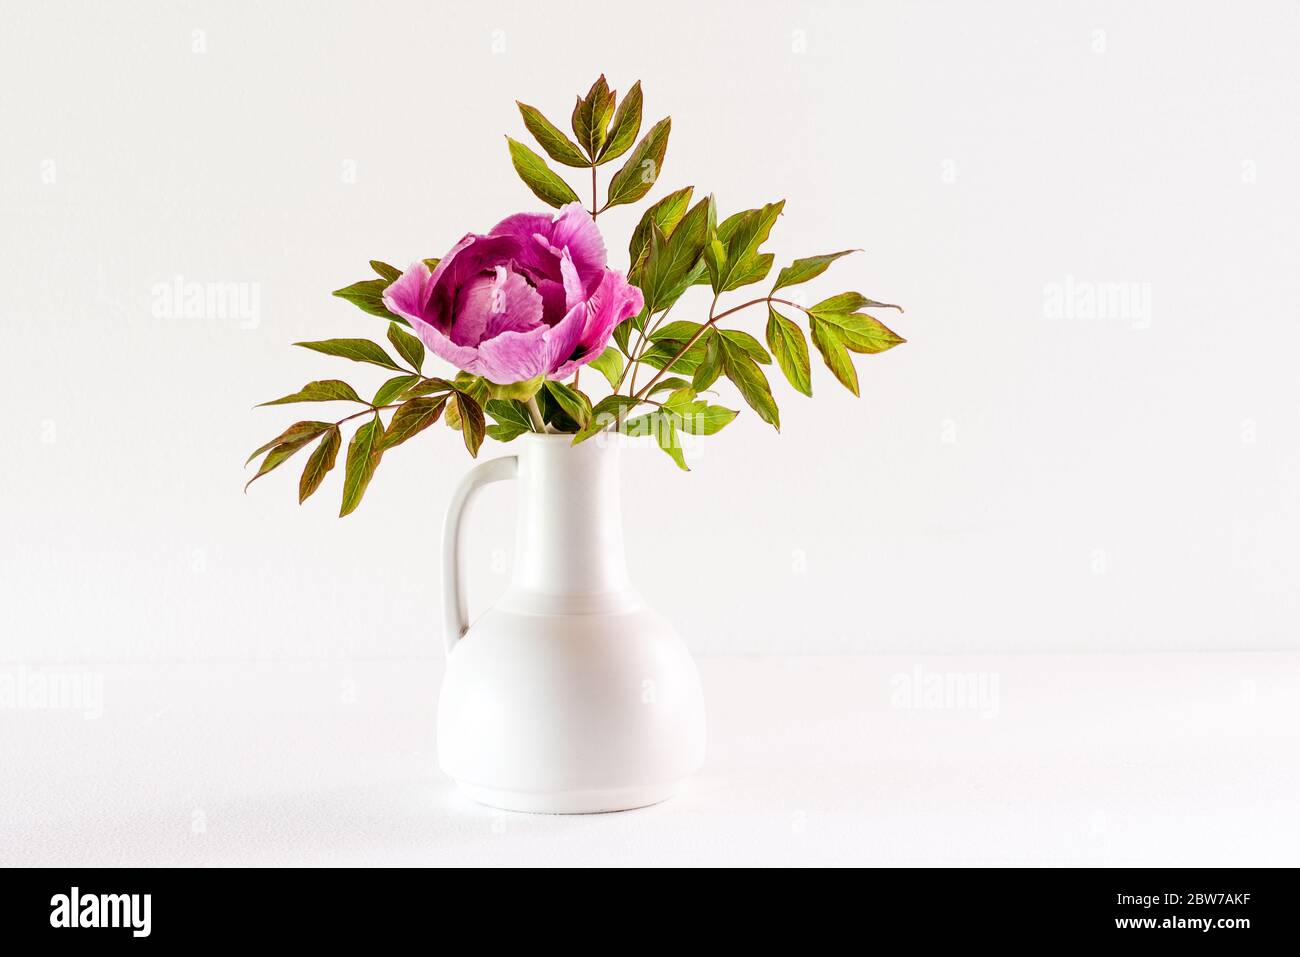 The beautiful and sumptuous flowering tree peony (Paeonia rockii or Paeonia suffruticosa rockii) in a white vase on white background. A flower with a Stock Photo